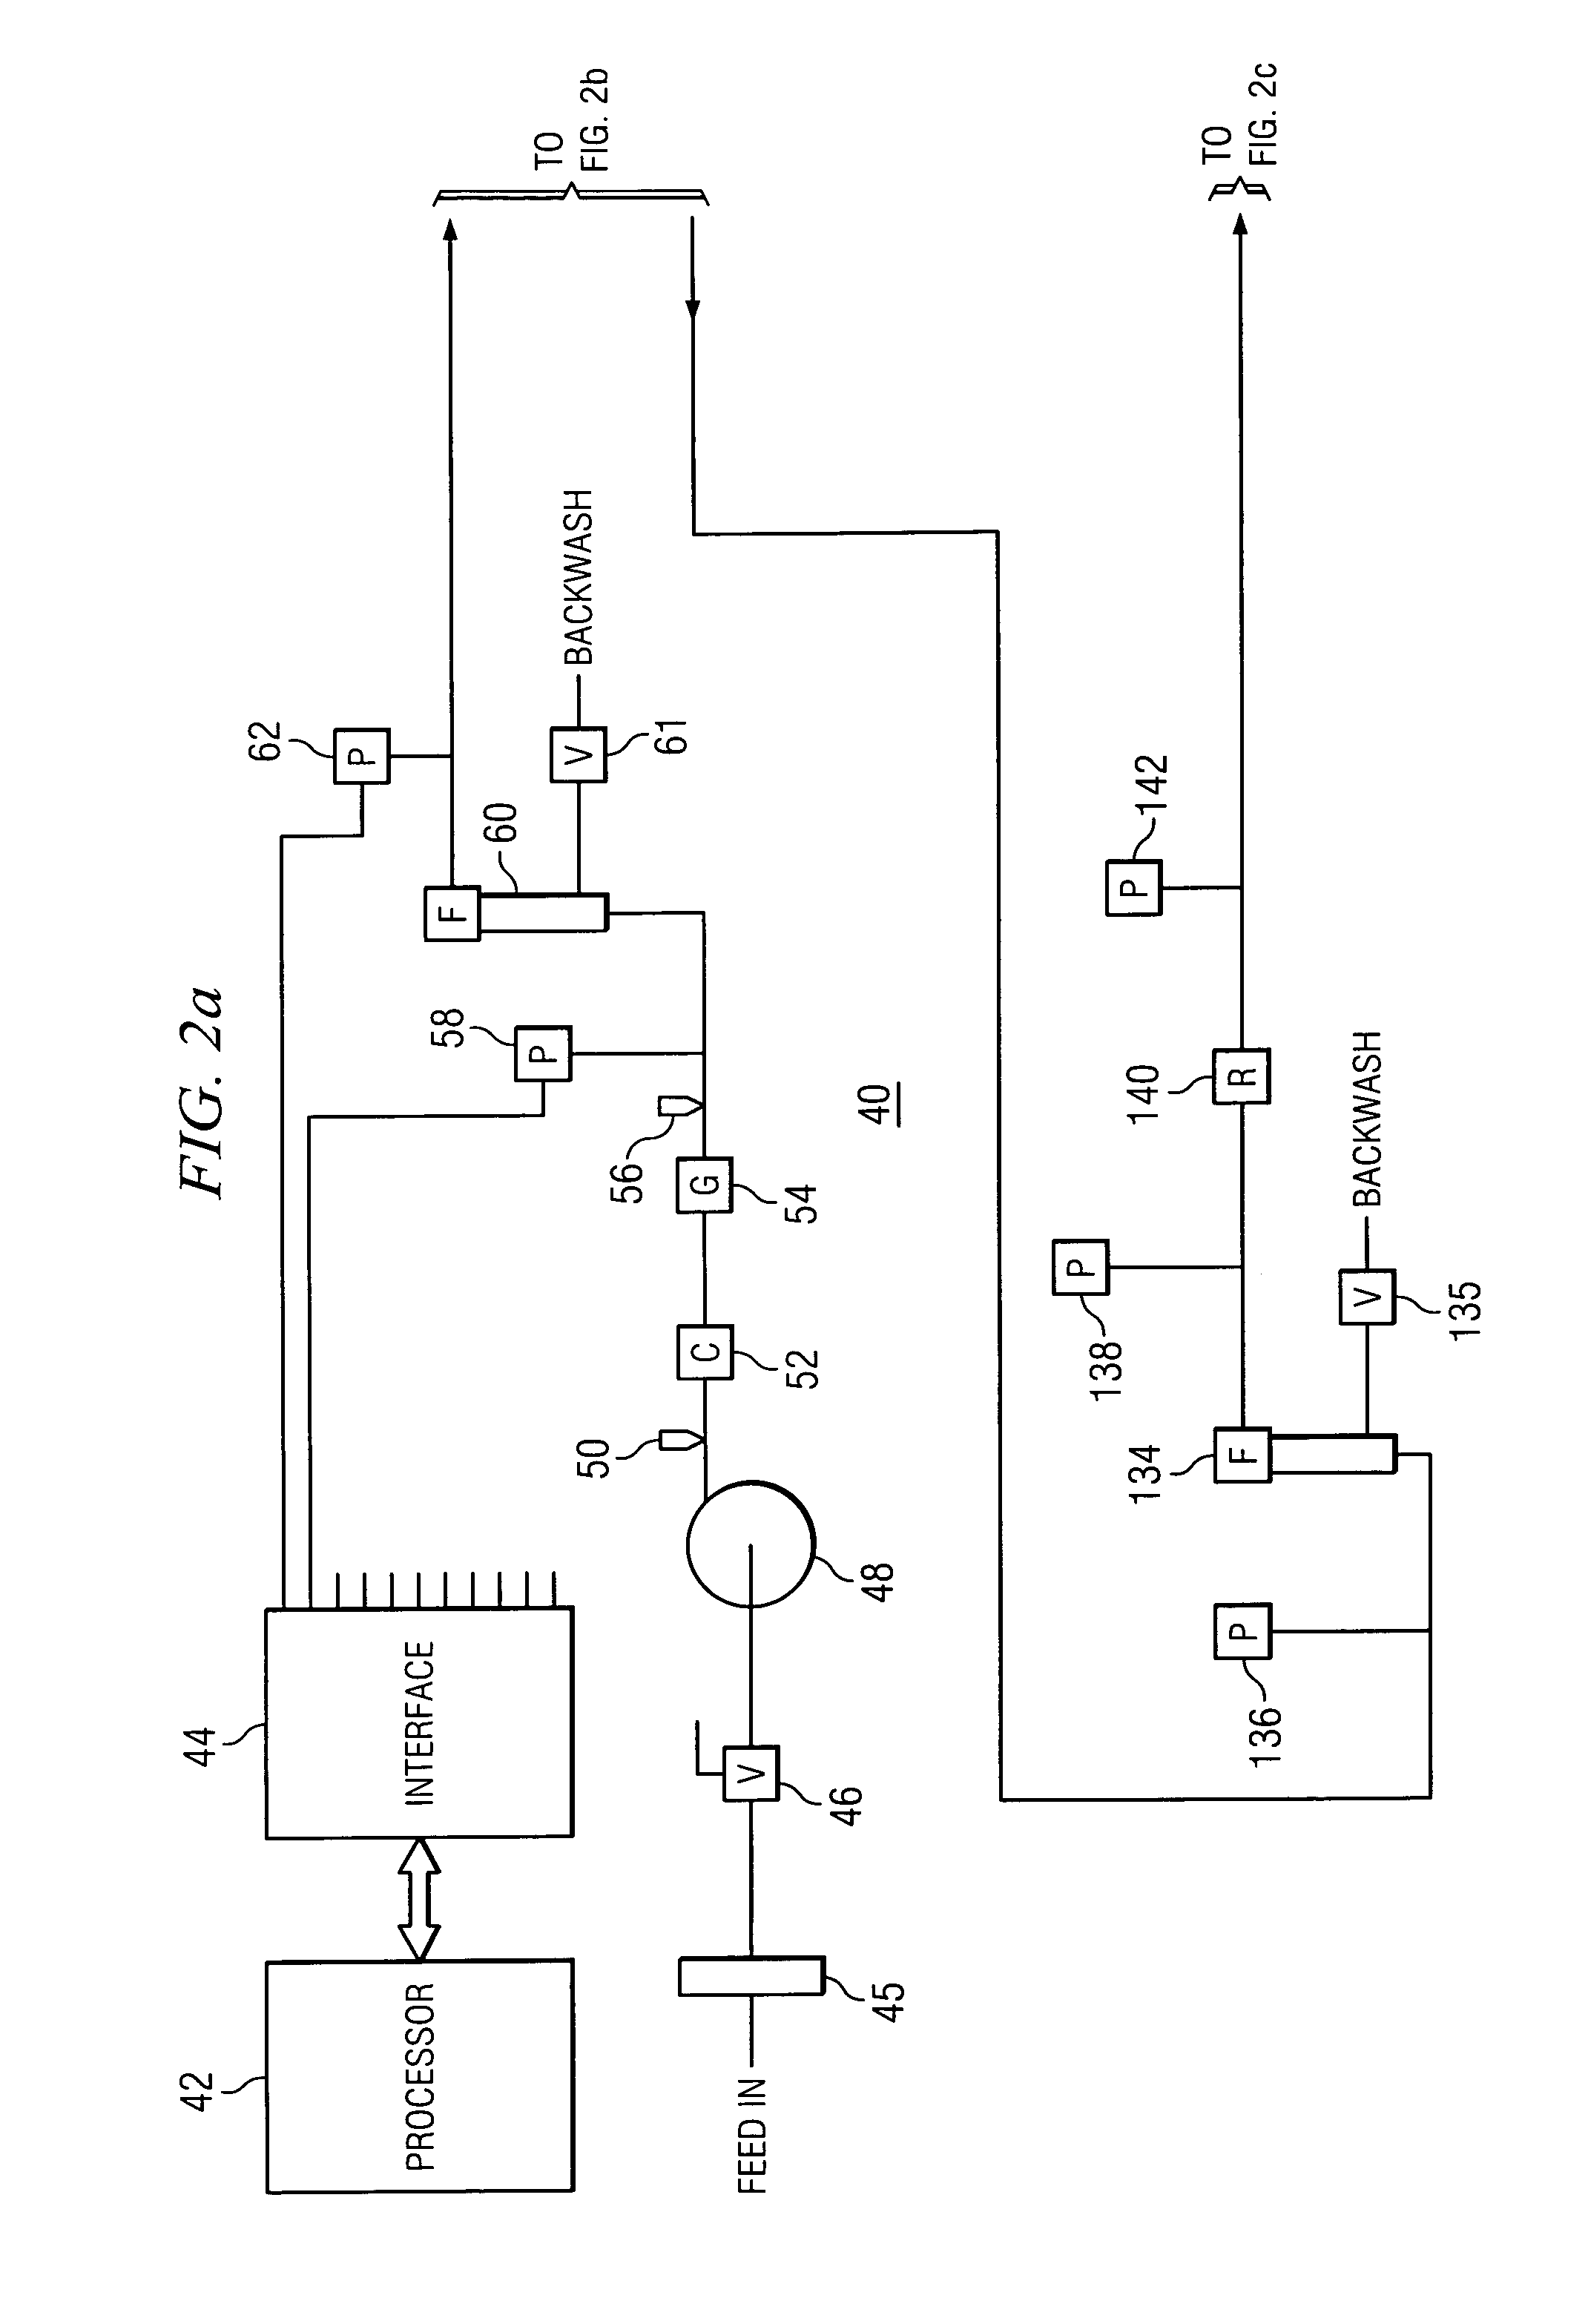 Method and apparatus for purifying water